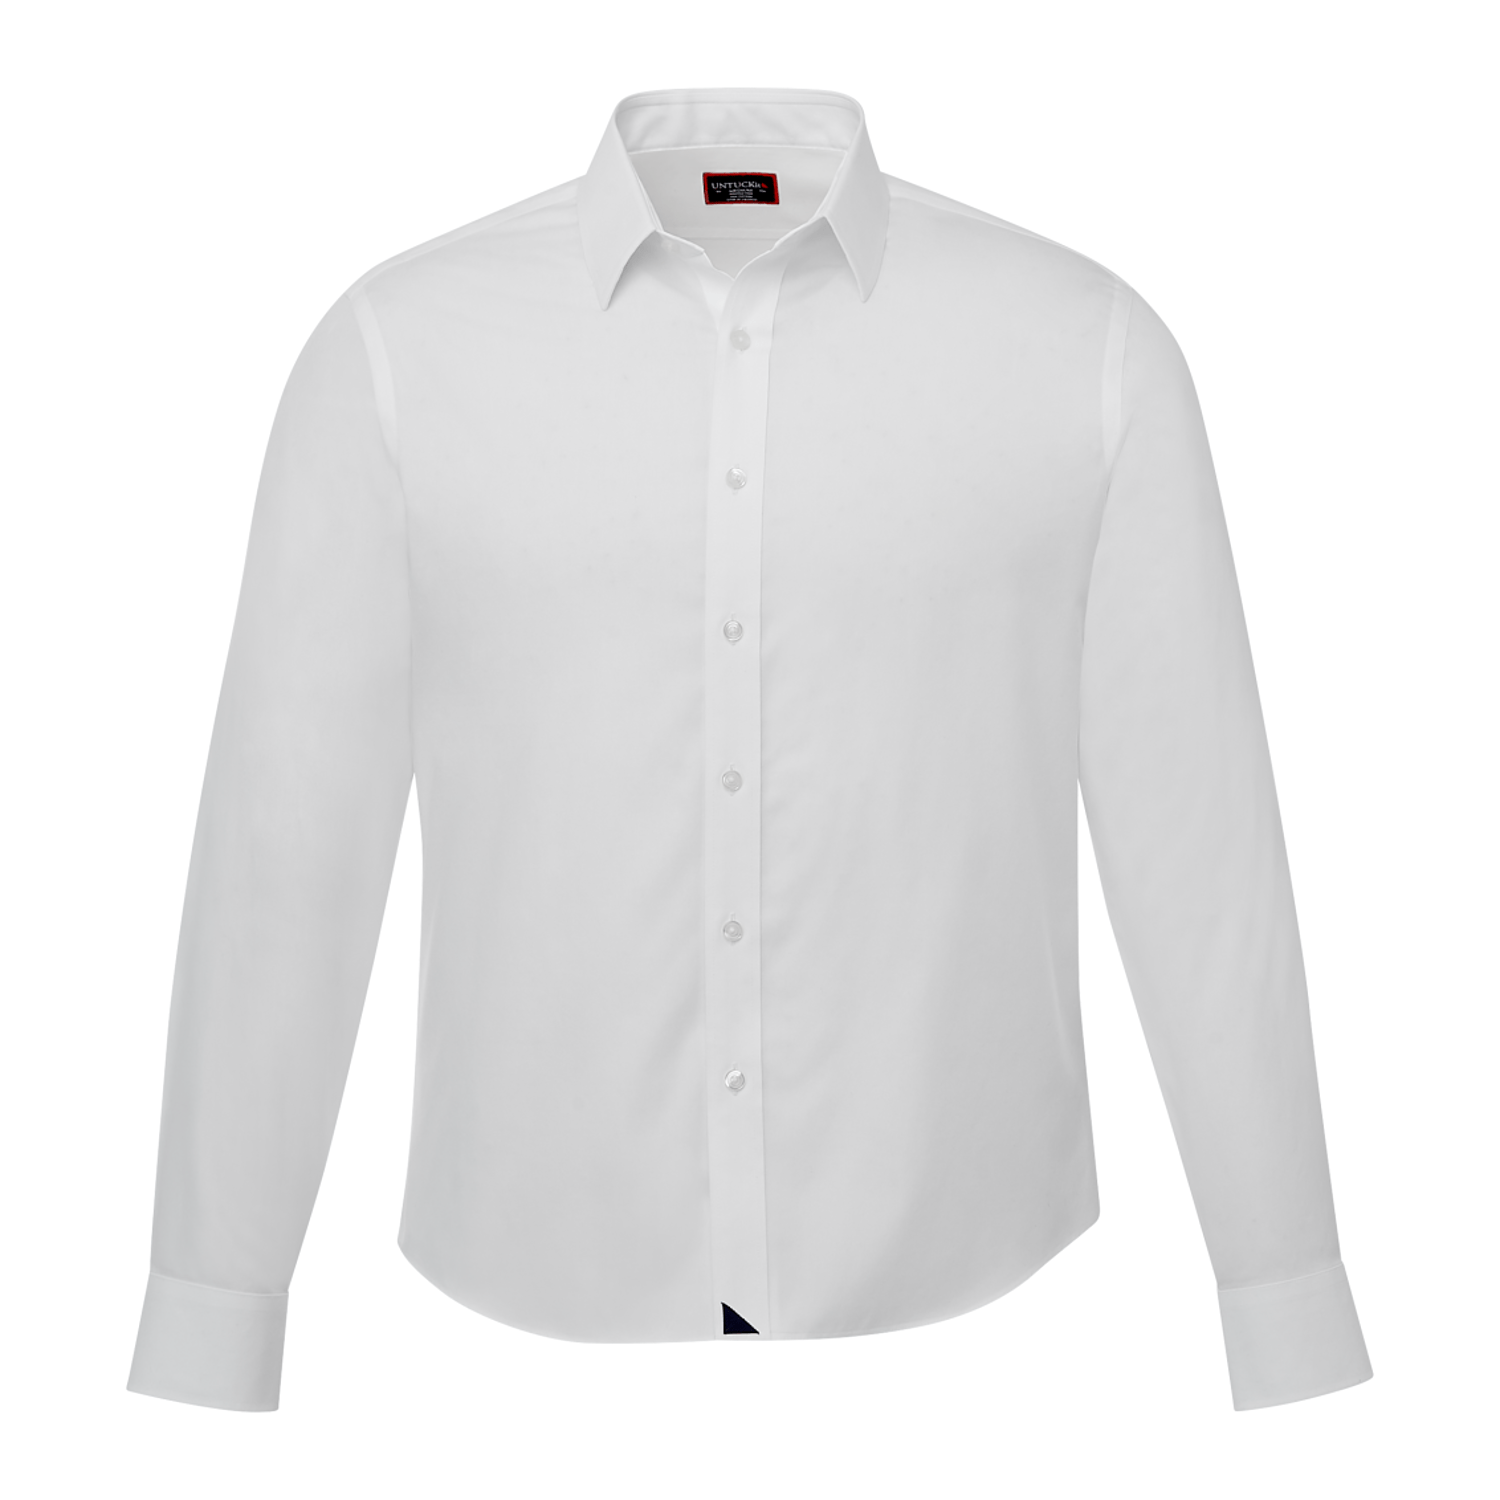 UNTUCKit Woven Shirts S / White UNTUCKit - Men's Las Cases Wrinkle-Free Long Sleeve Shirt